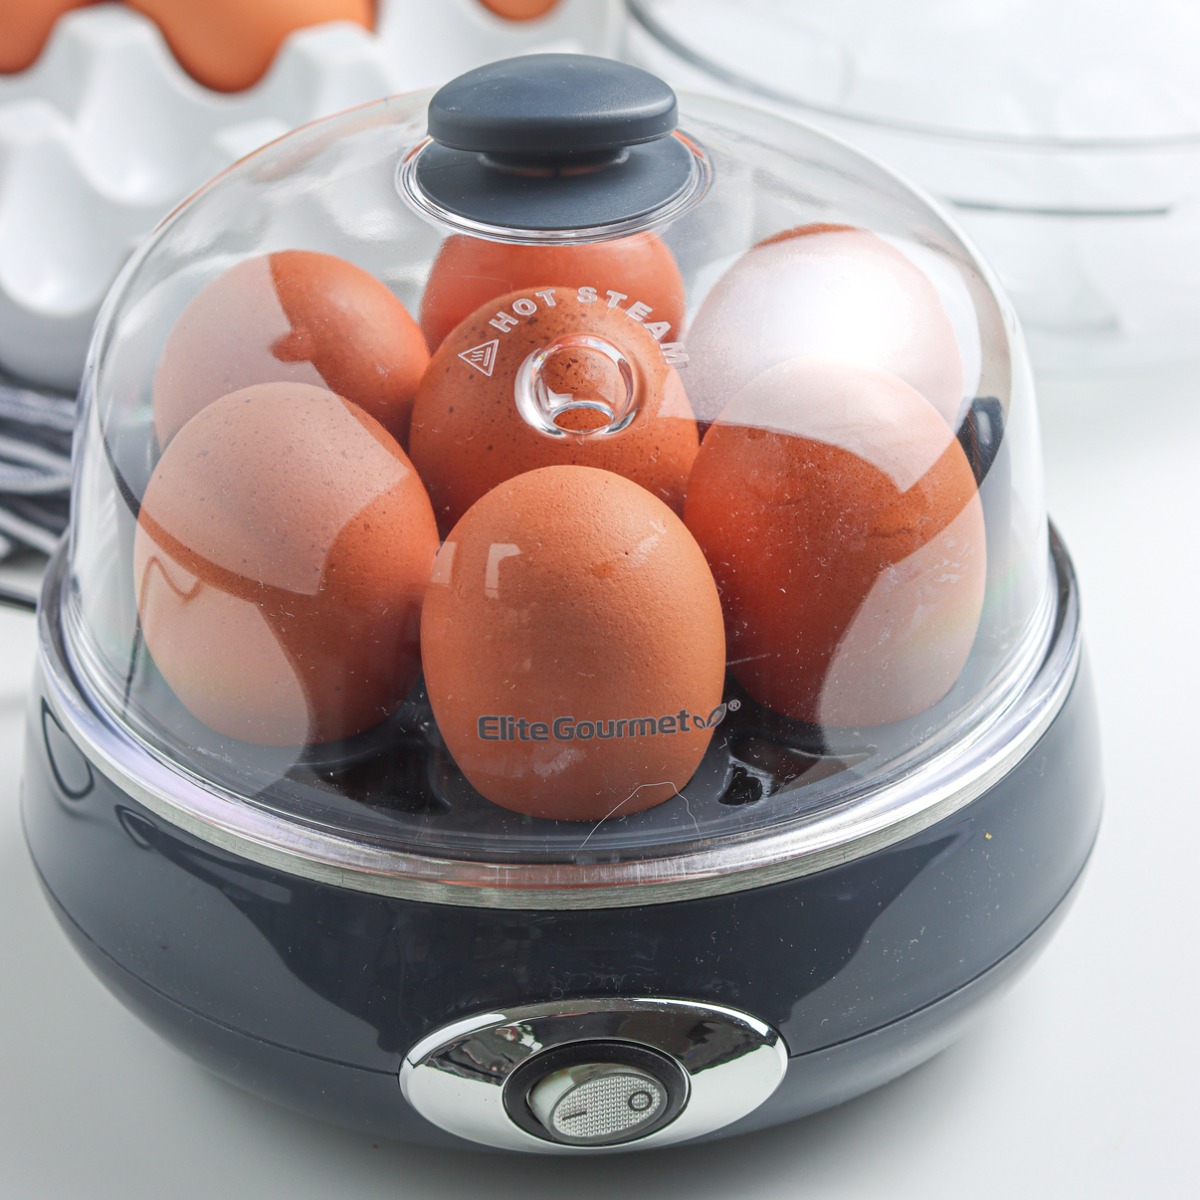 https://www.thefoodieaffair.com/wp-content/uploads/2022/04/Egg-Cooker-Hard-Boiled-1200.jpeg